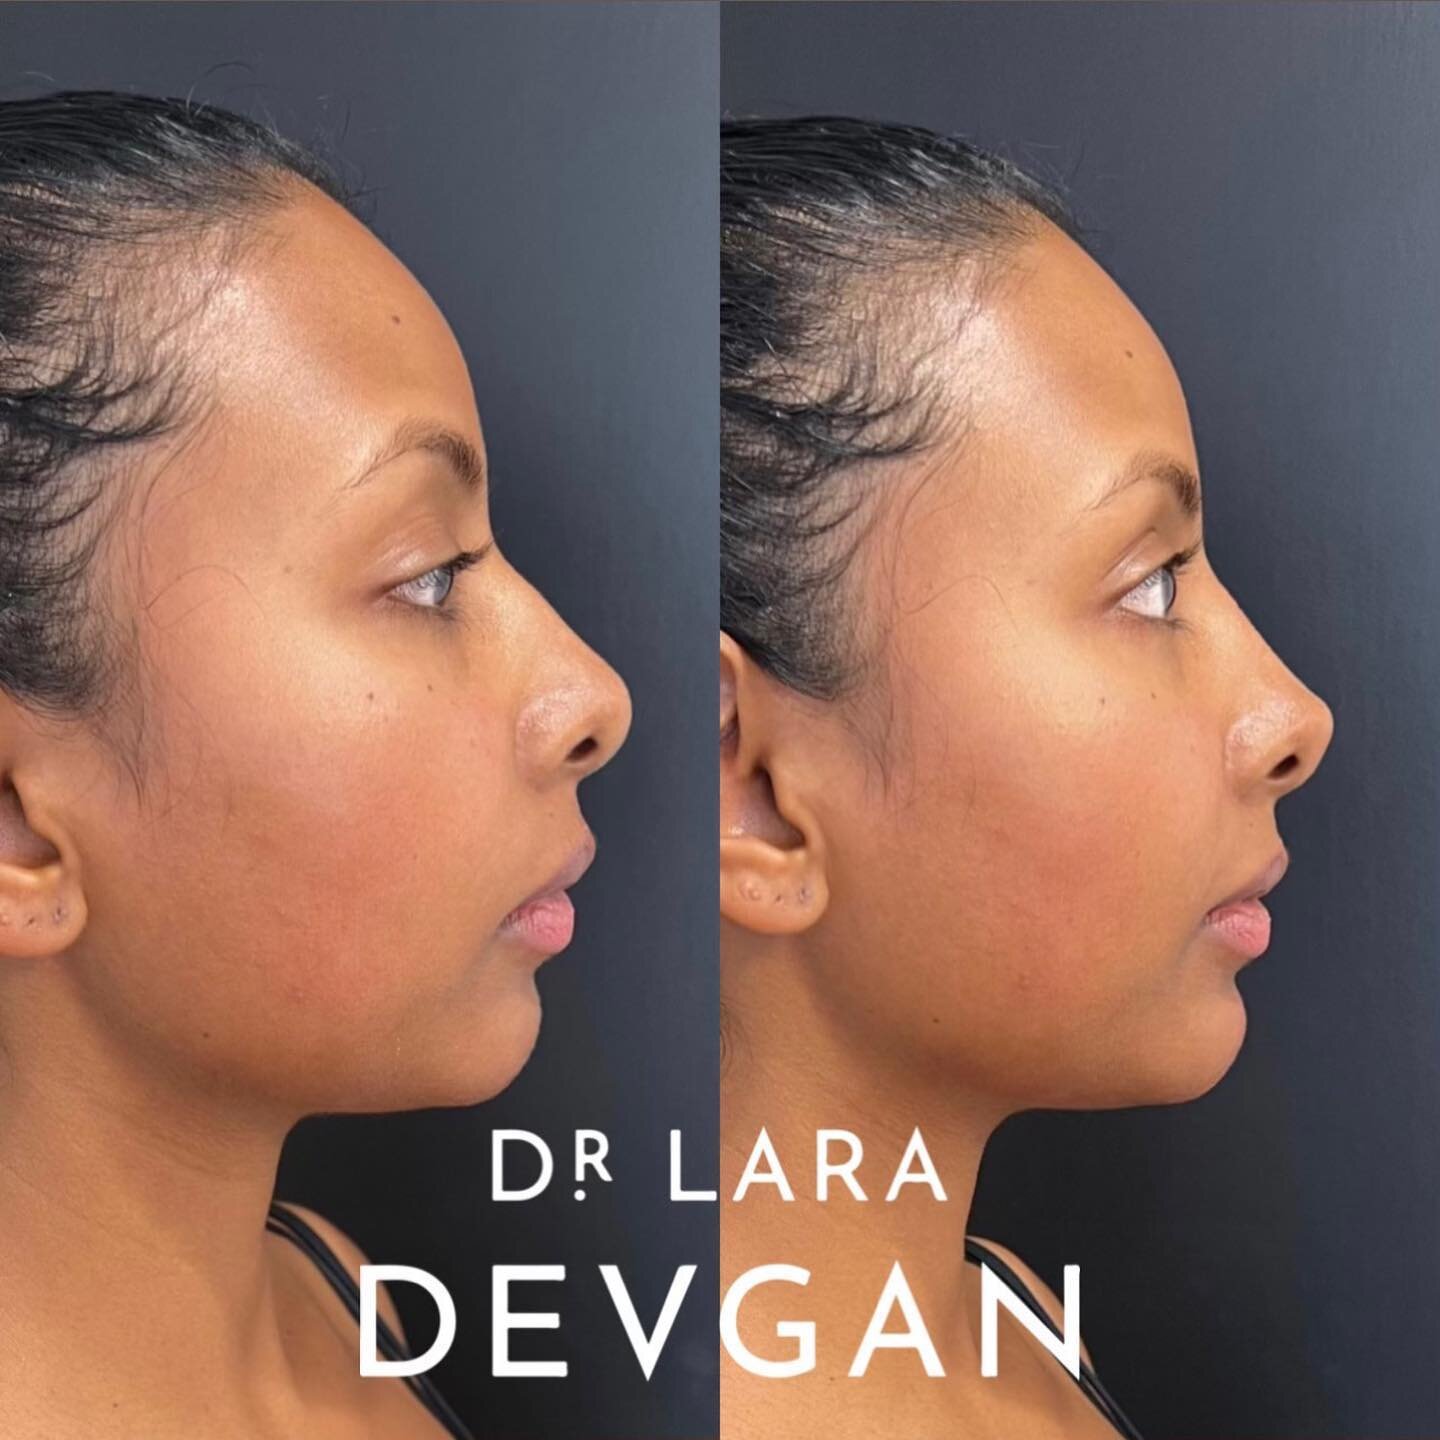 Nonsurgical profile balancing 📐📐📐 My signature approach to nonsurgical rhinoplasty and chin augmentation for harmony of the features. #beautyisinthedetails #facialoptimization #boardcertifiedplasticsurgeon #devganoptimization #nonsurgicalrhinoplas